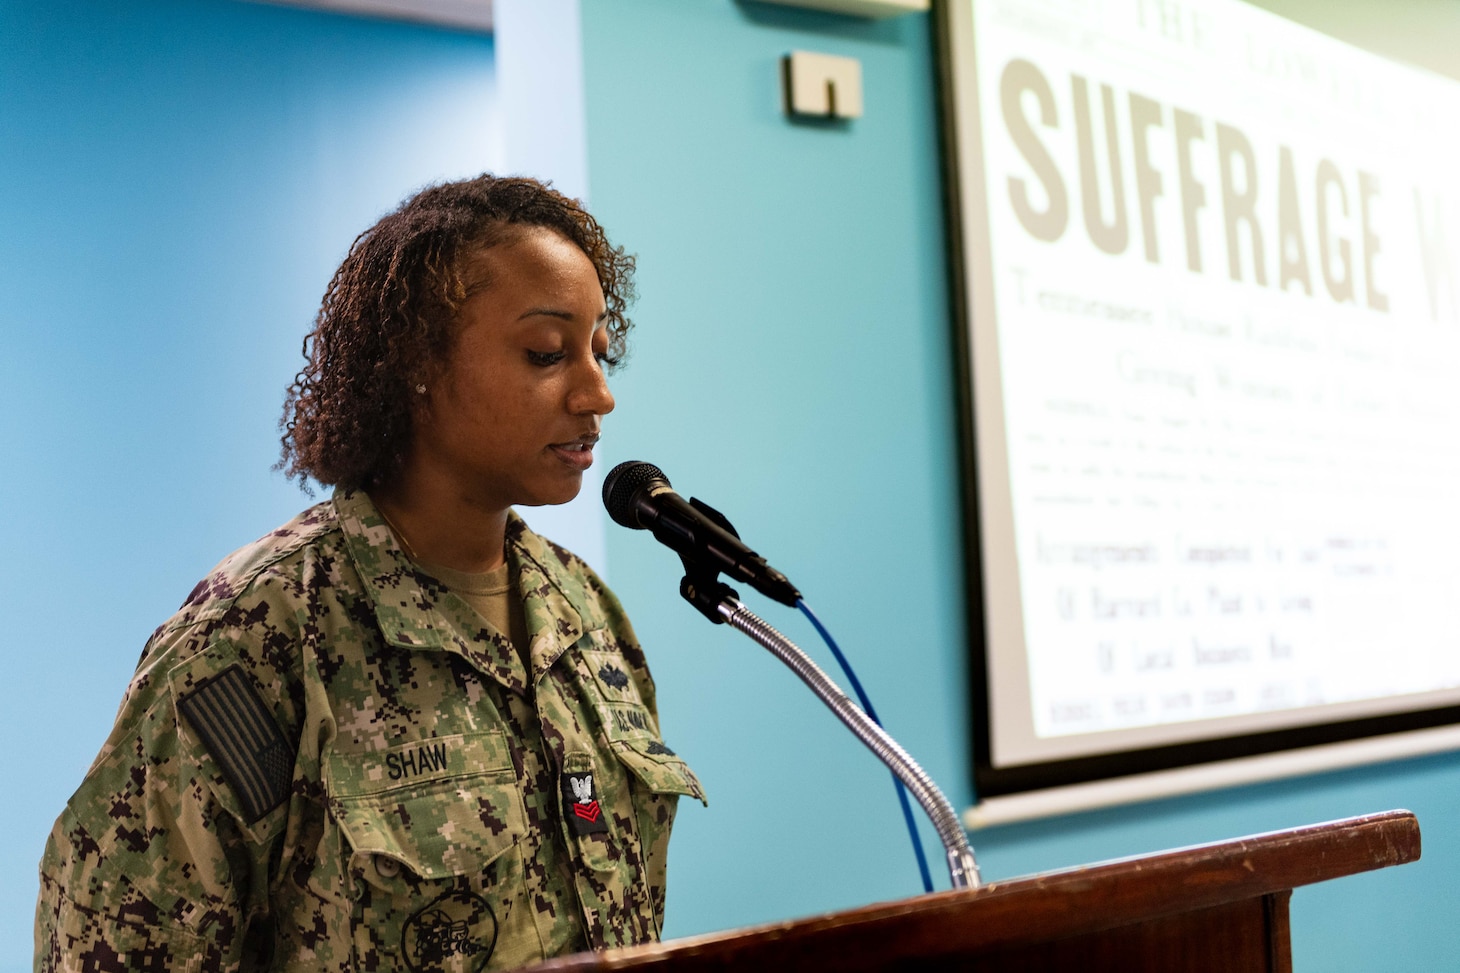 Utilitiesman 1st Class Jamiah Shaw, assigned to Naval Support Activity Souda Bay, discusses historical and contemporary figures influential to the advancement of women’s equality and provides personal reflections on the importance of women’s equality in society during an early commemoration of Women’s Equality Day on Aug. 18, 2023.